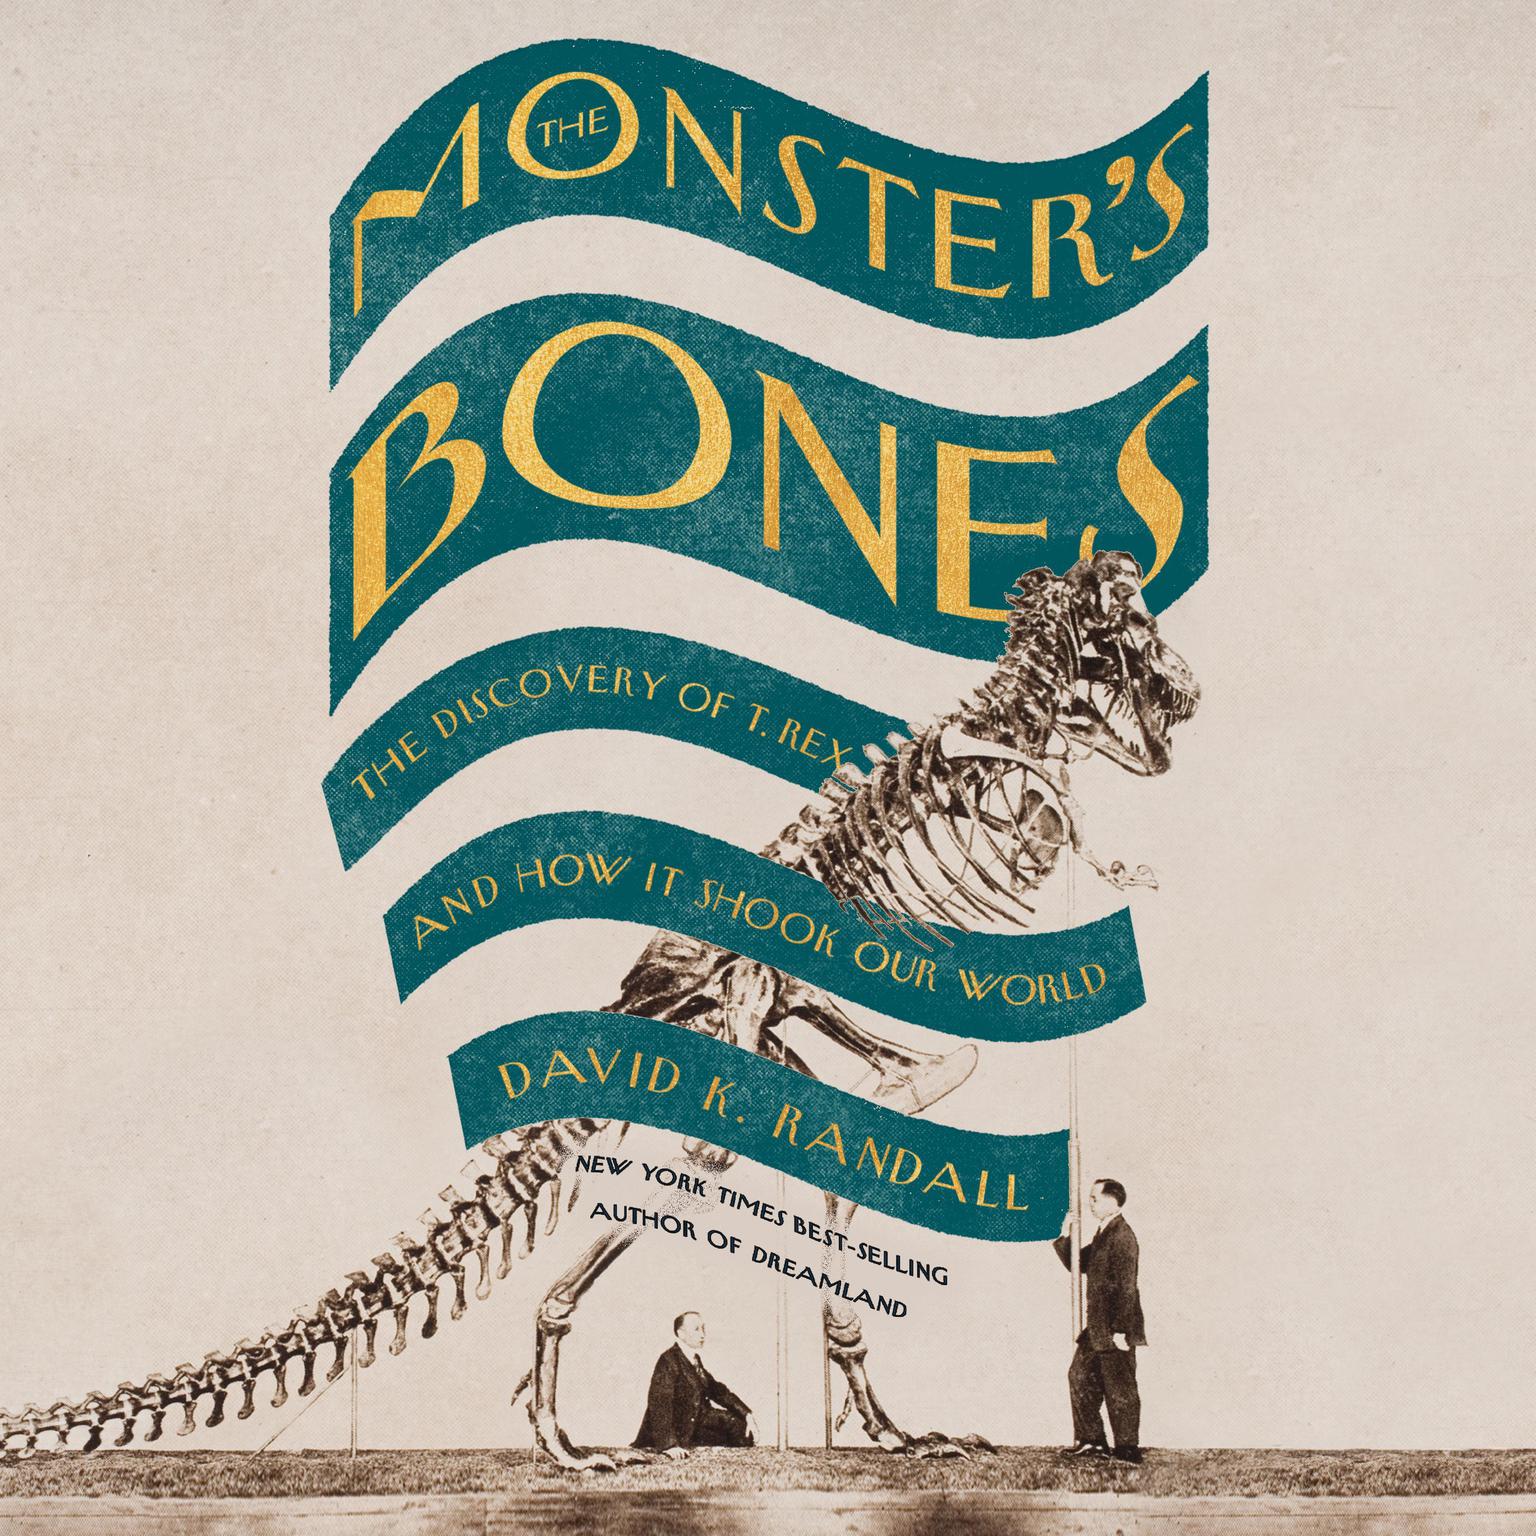 The Monsters Bones: The Discovery of T. Rex and How It Shook Our World Audiobook, by David K. Randall